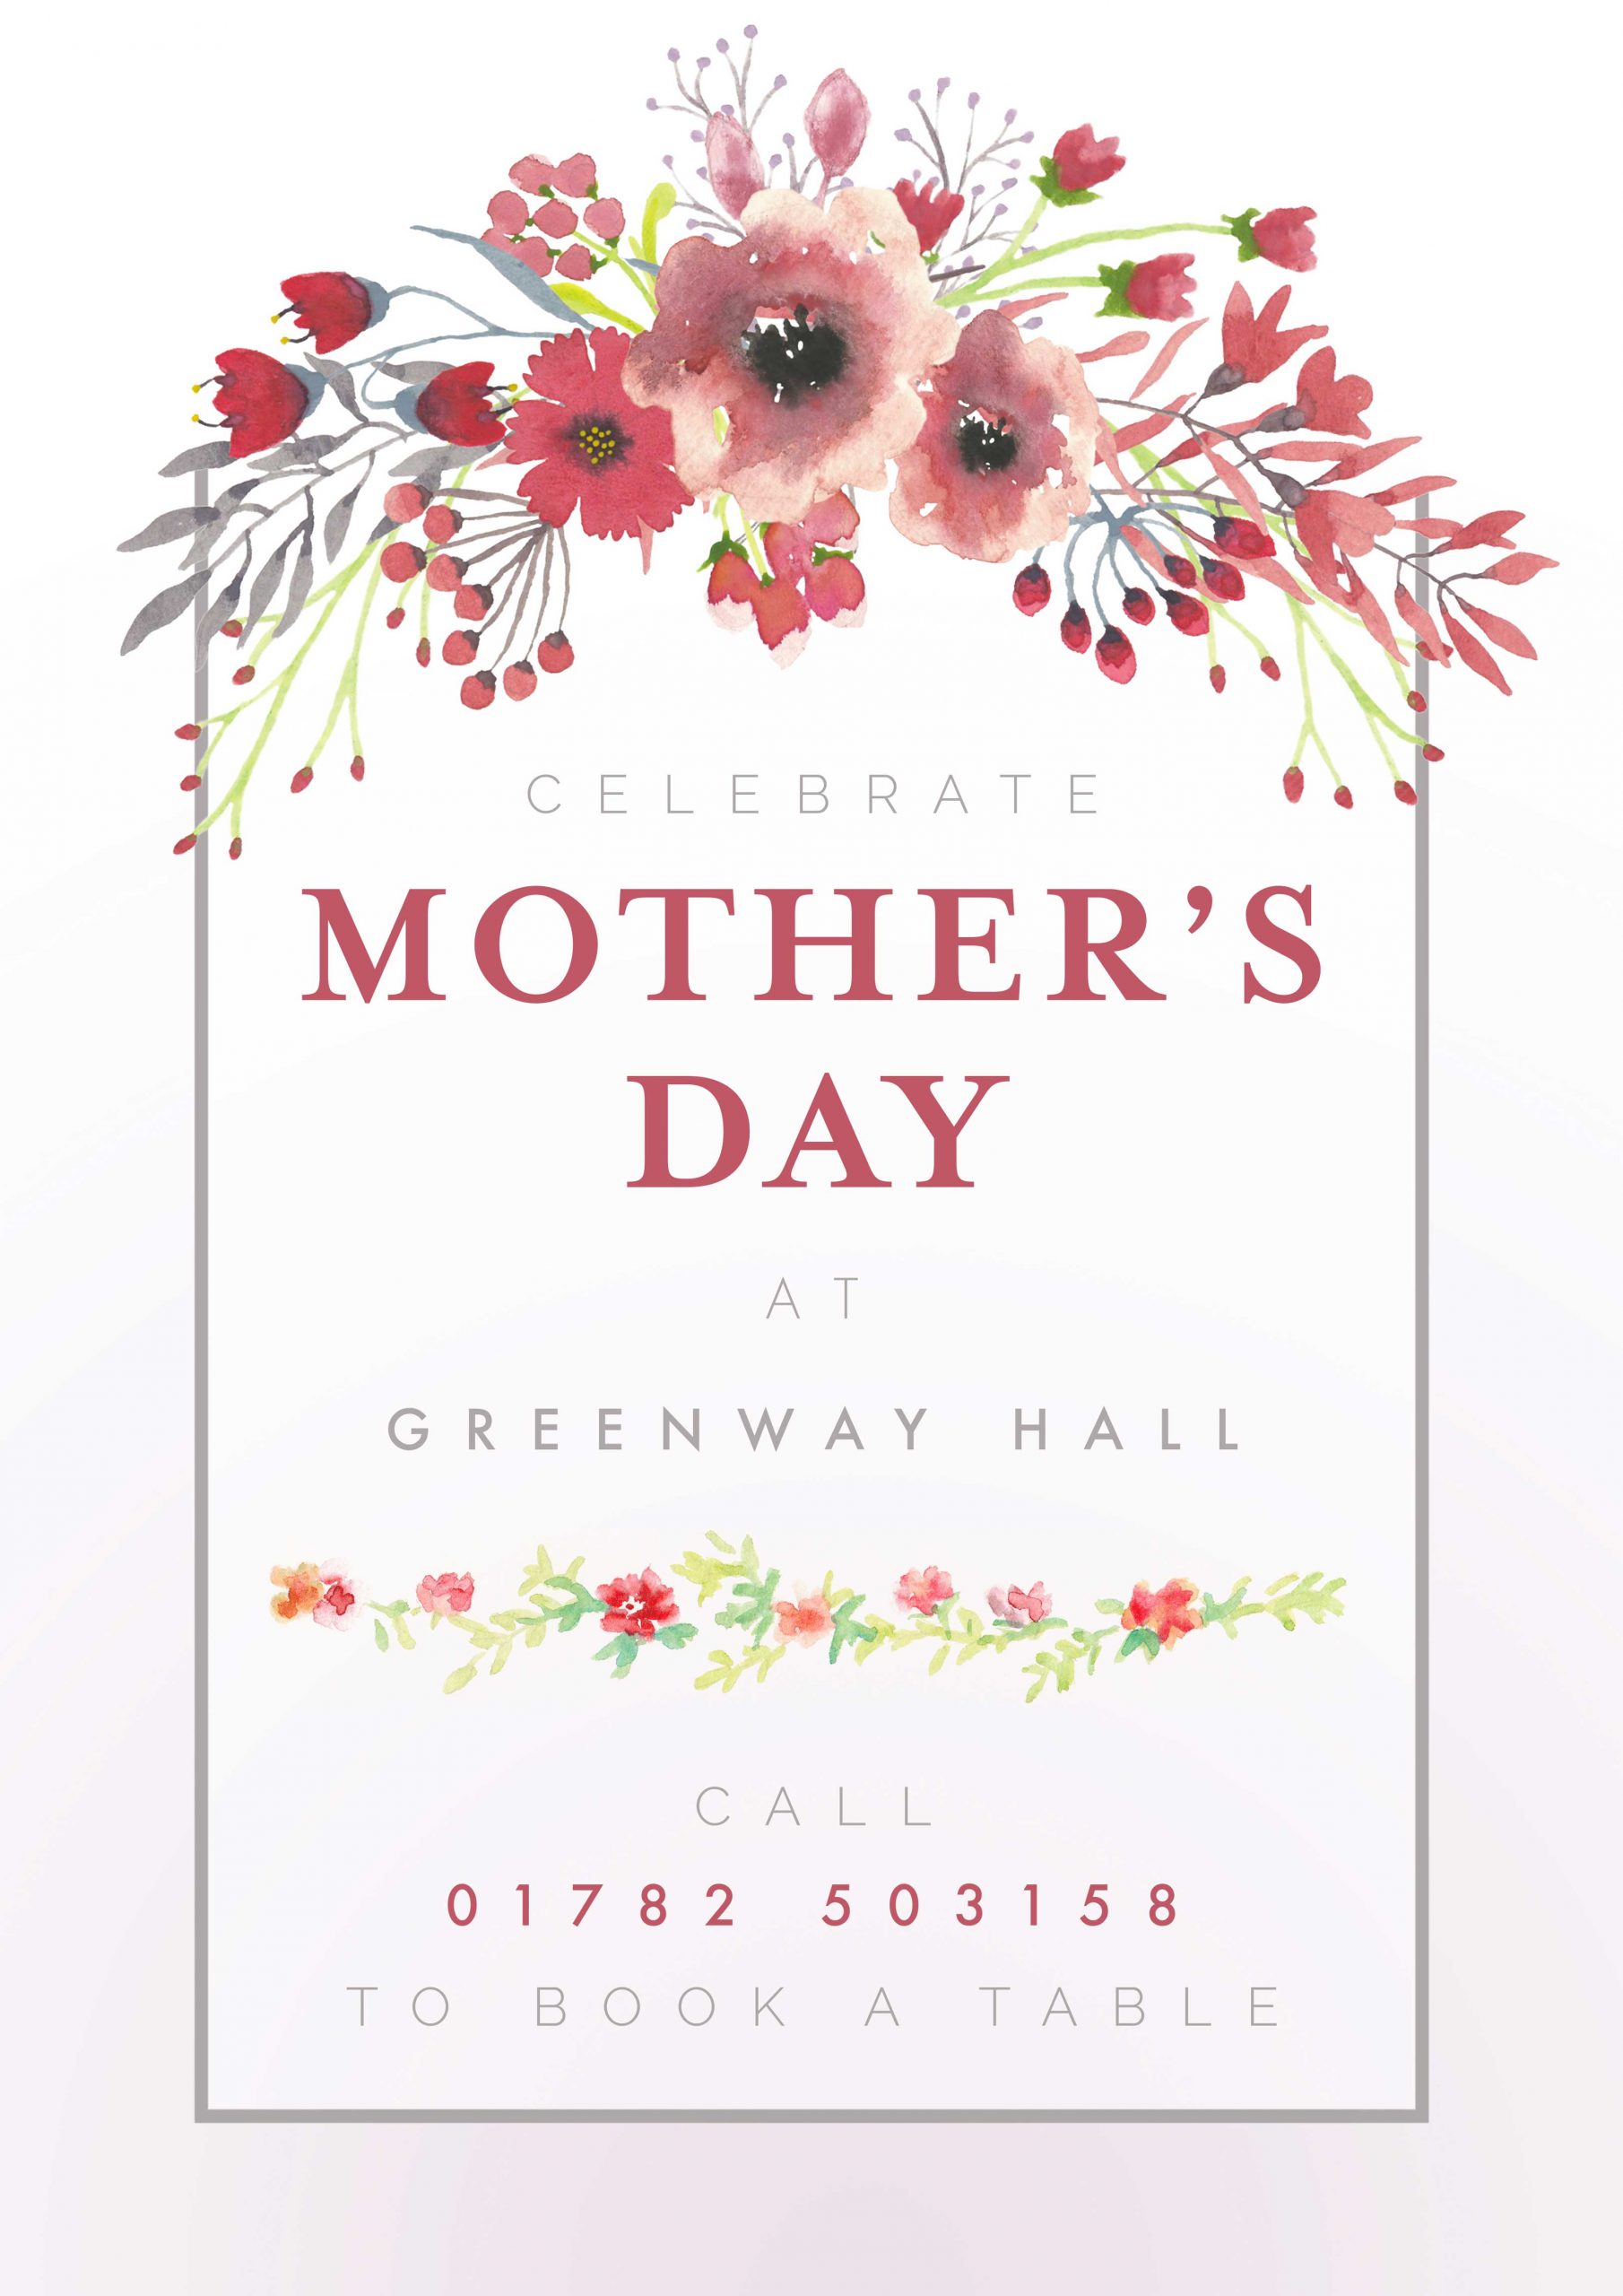 mother's day flyer templates free download, mother's day flyer template psd, mother's day sale flyer template, mother's day brunch flyer template, free mother's day flyer template, microsoft word mother's day flyer template, mother's day poster template